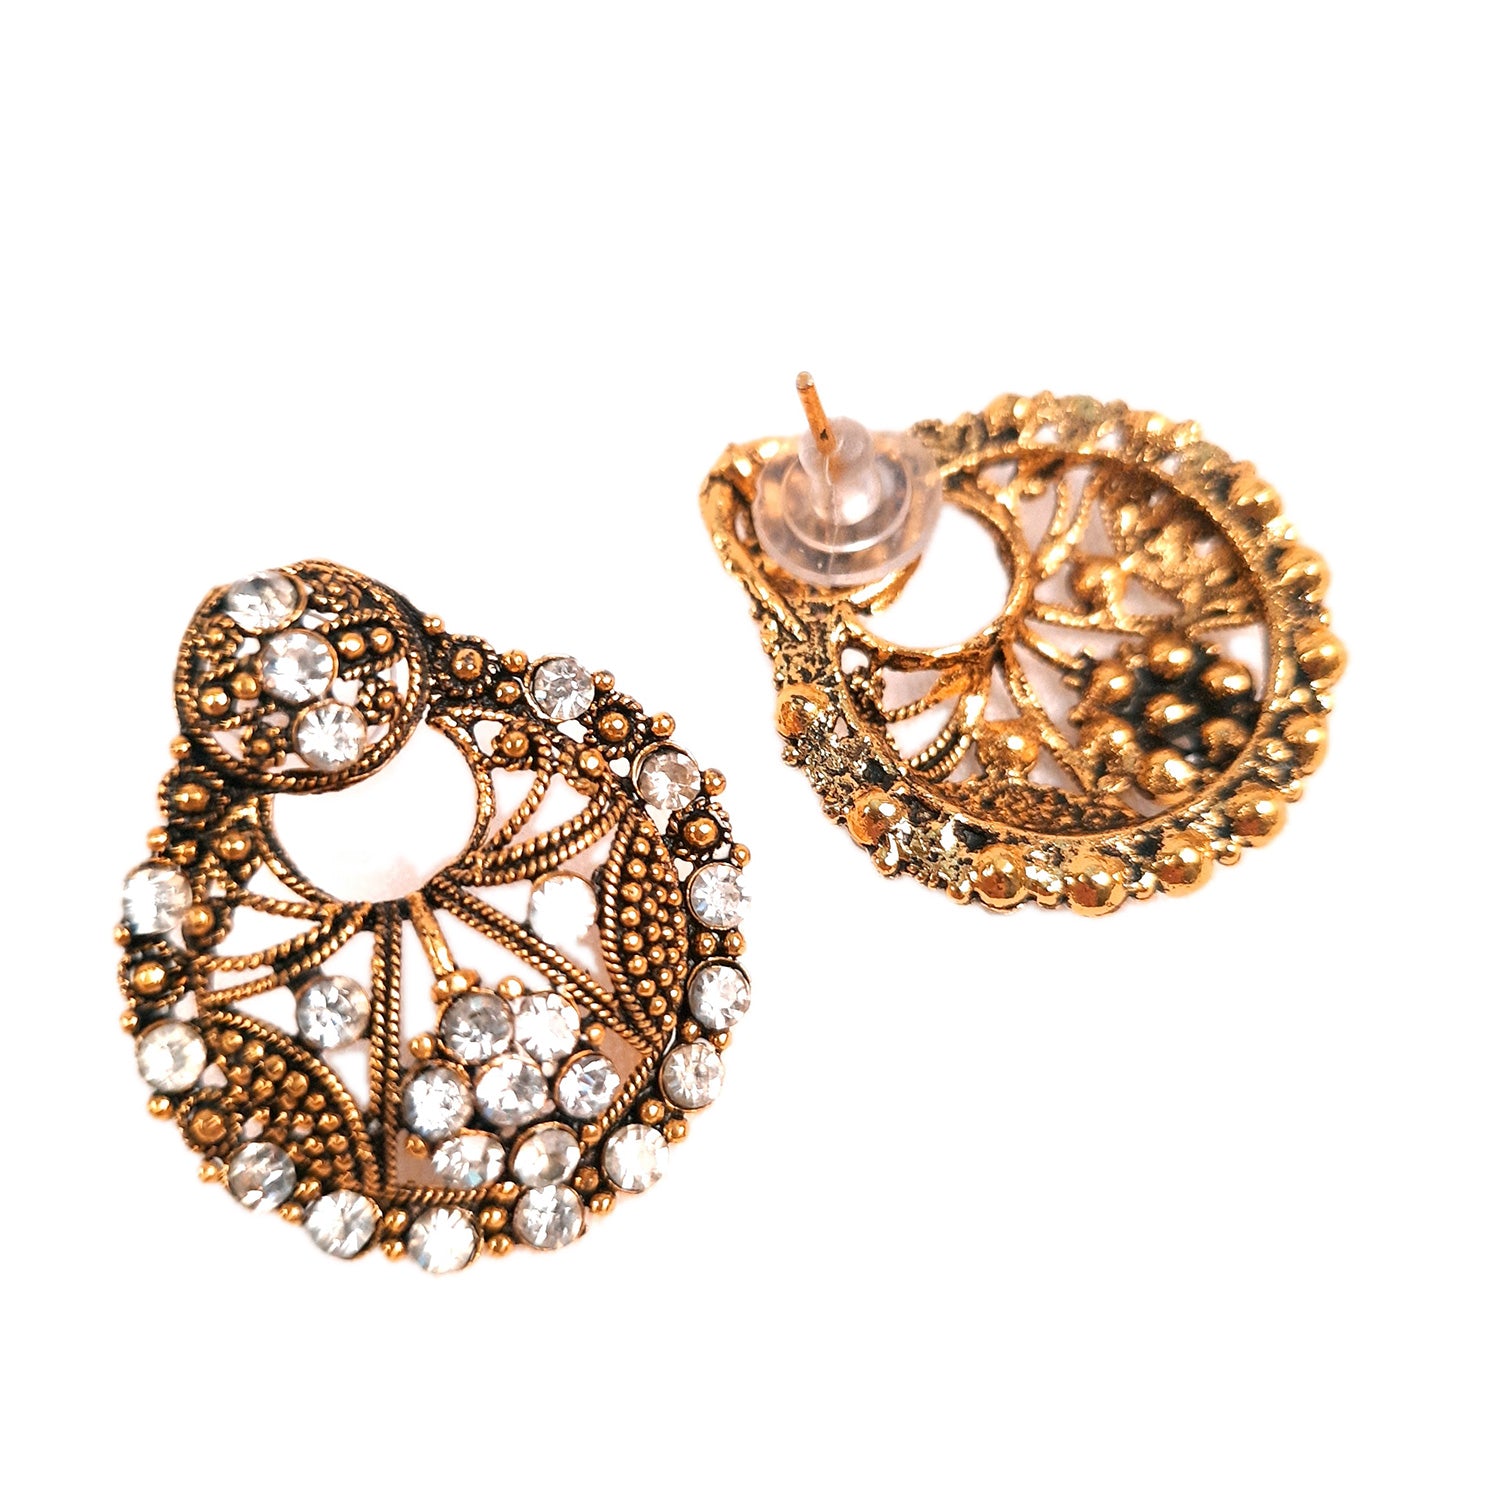 Stone Earrings Stud for Women & Girls | Latest Stylish Fashion Jewellery | Gifts for Her, Friendship Day, Valentine's Day Gift